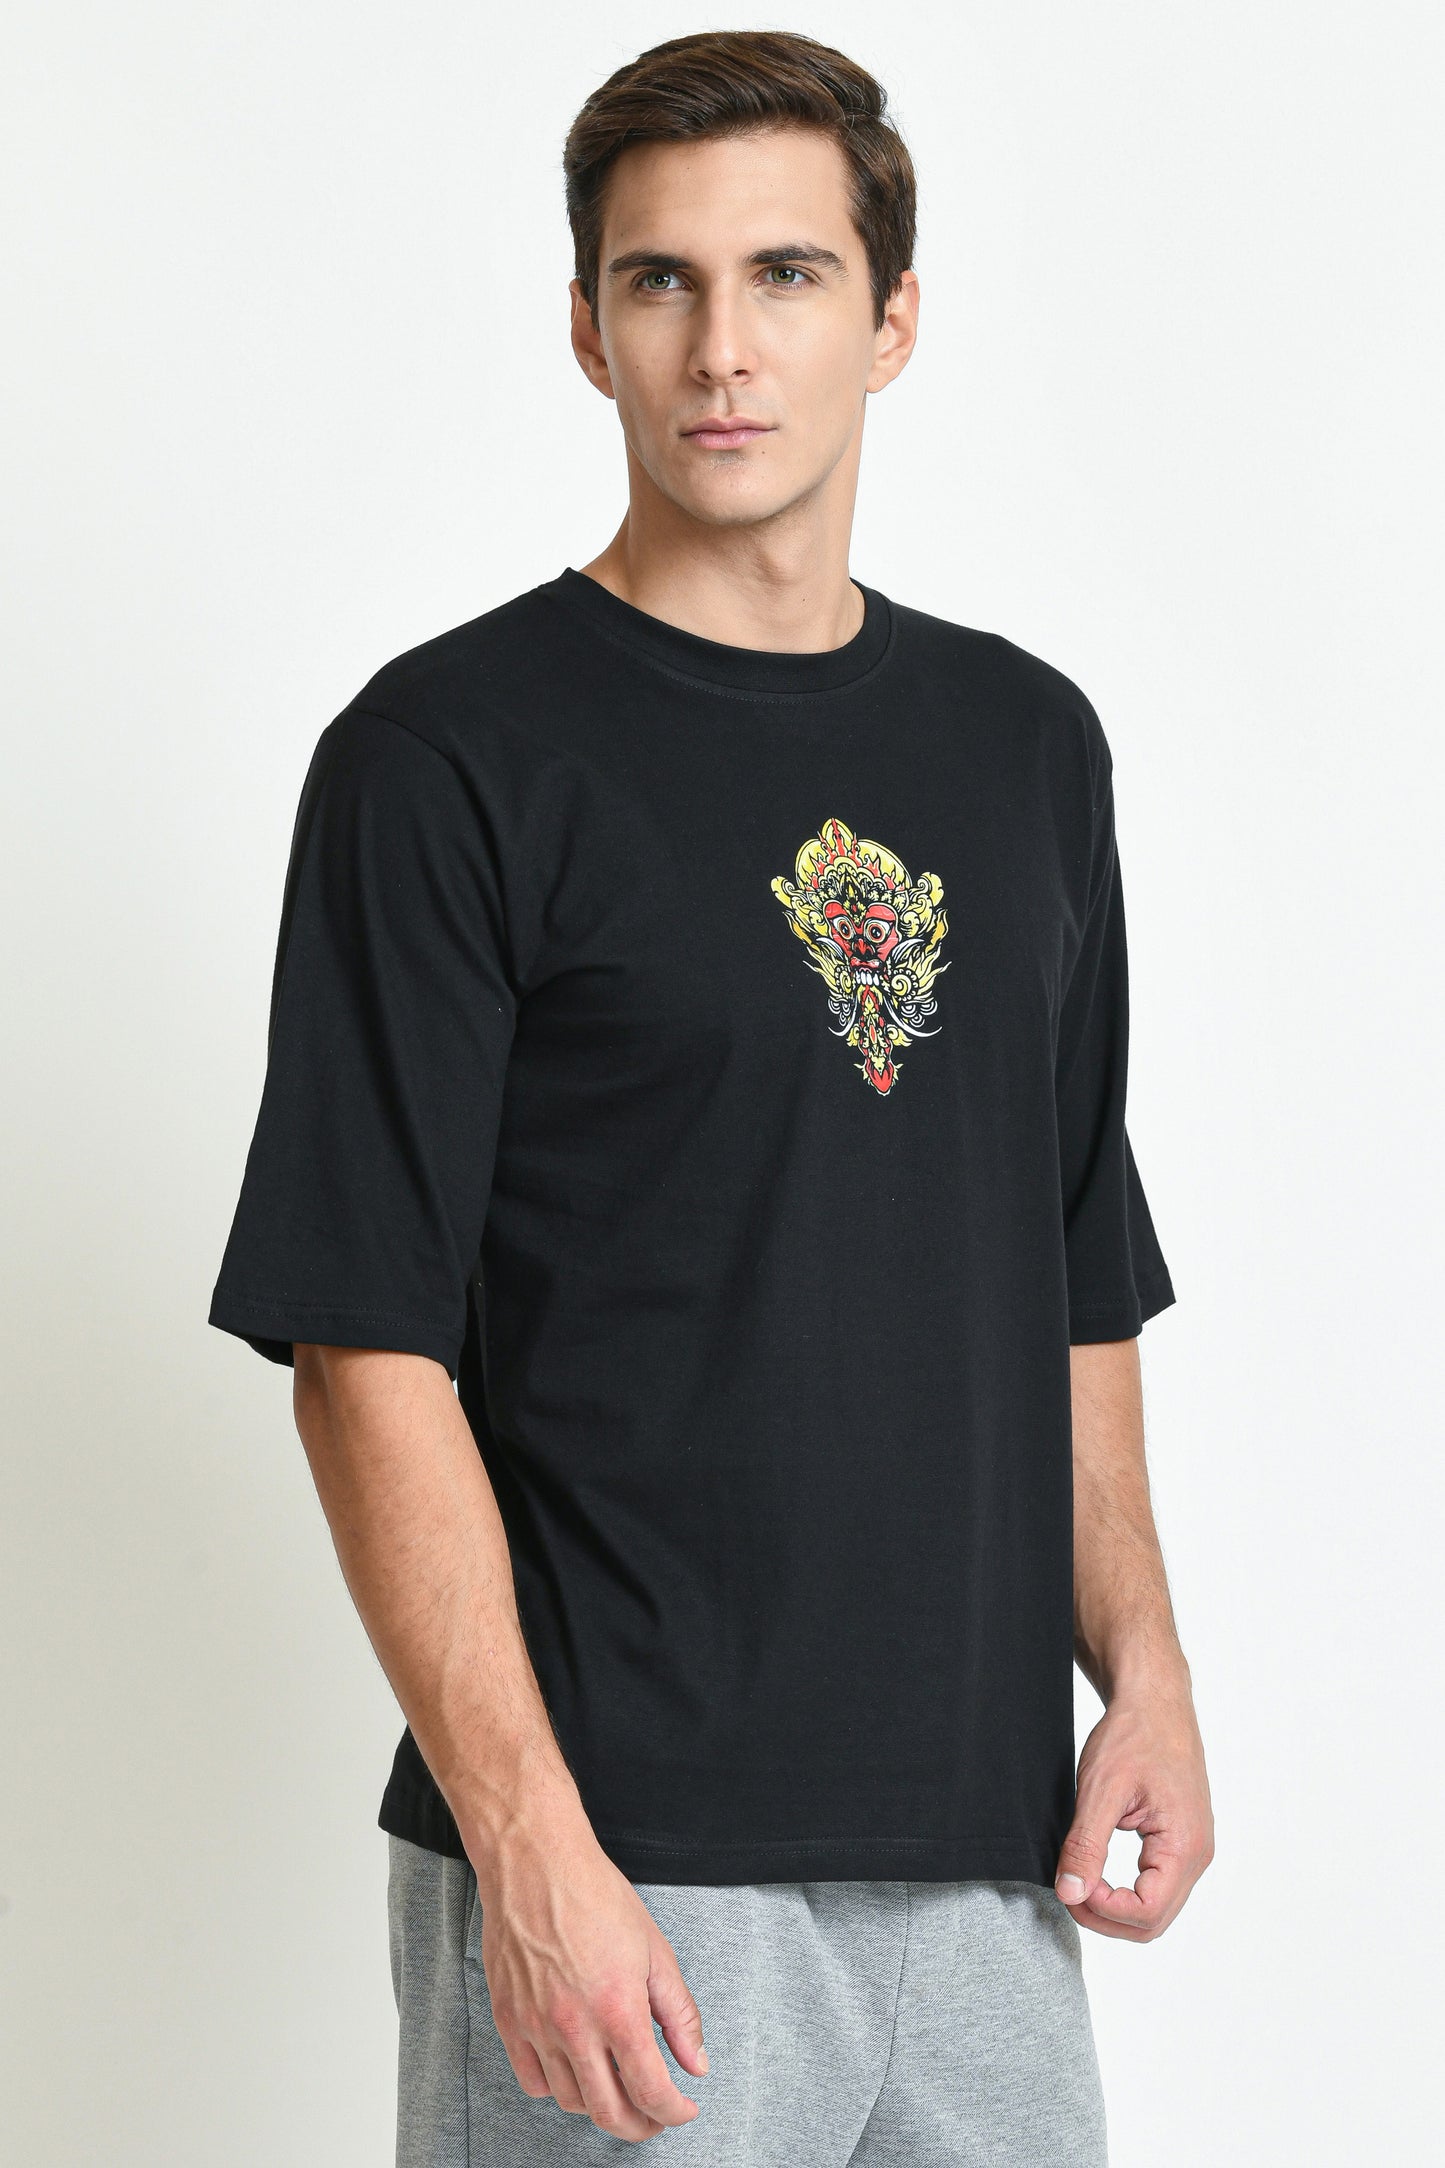 MYTHICAL CREATURE PRINTED OVERSIZED T-SHIRT